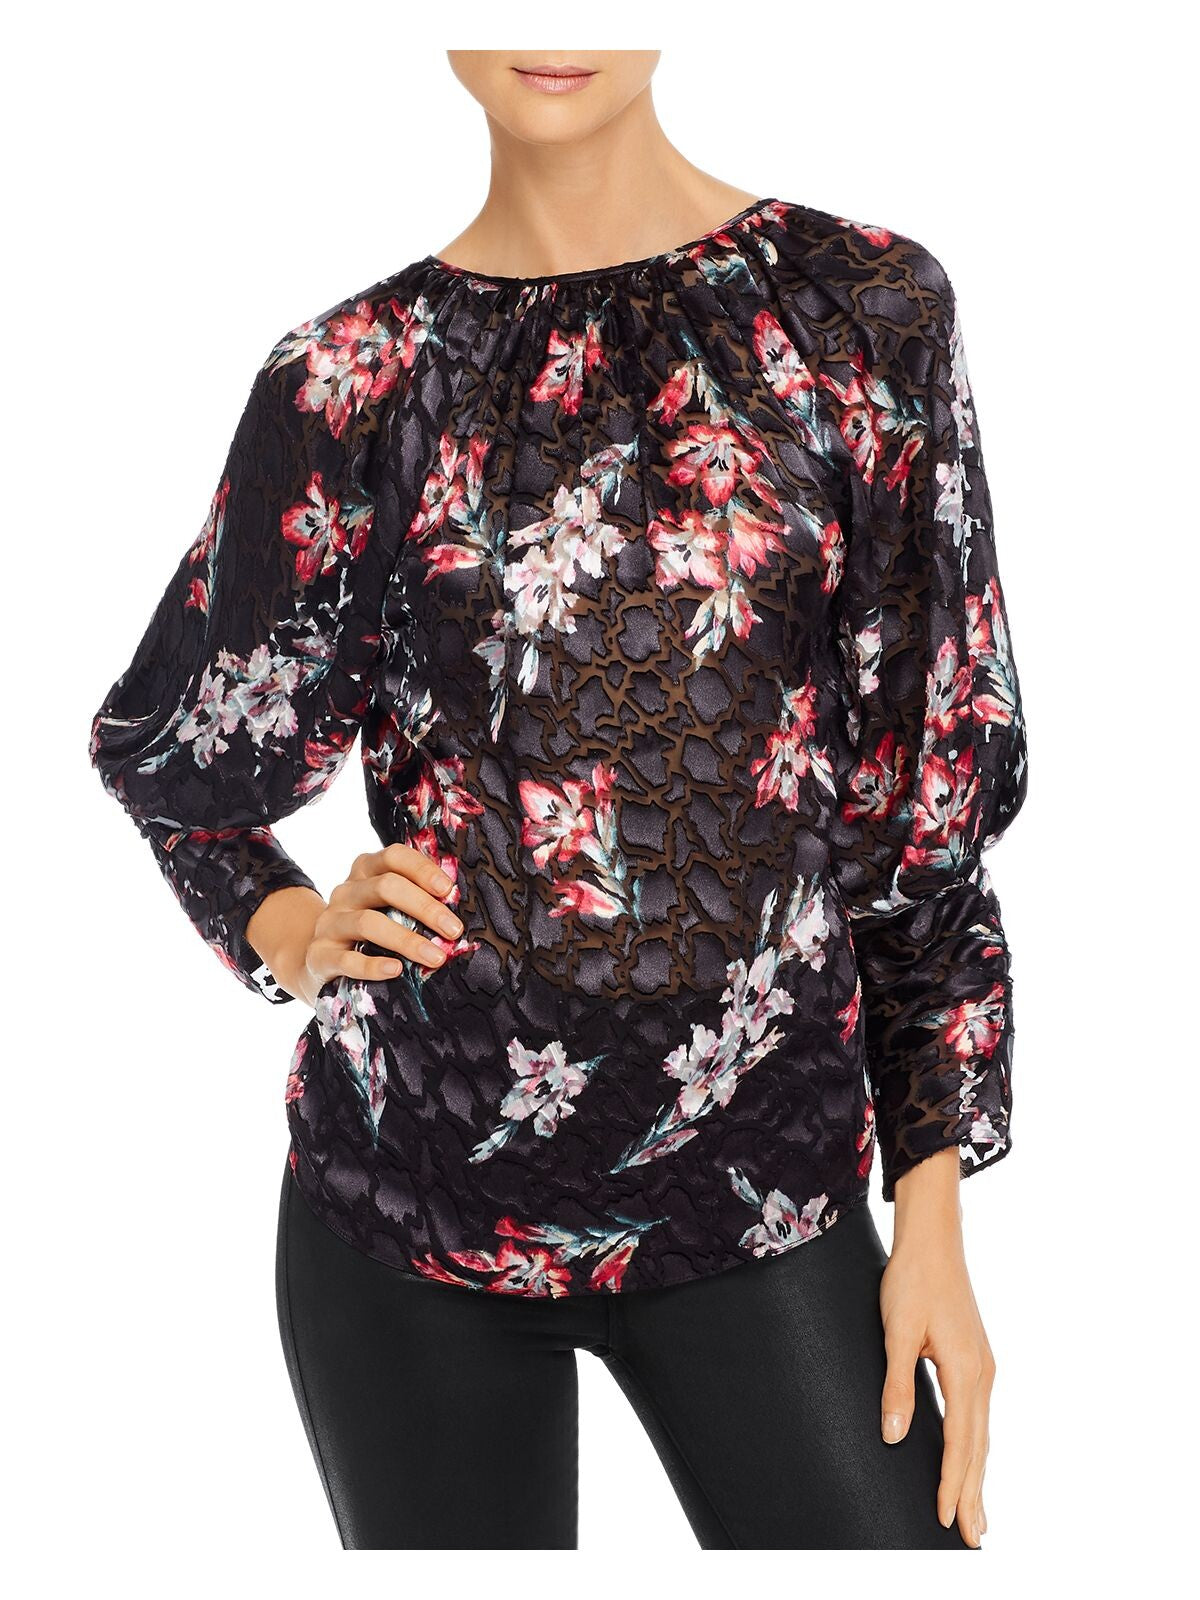 REBECCA TAYLOR Womens Black Sheer Floral Long Sleeve Keyhole Wear To Work Blouse 6